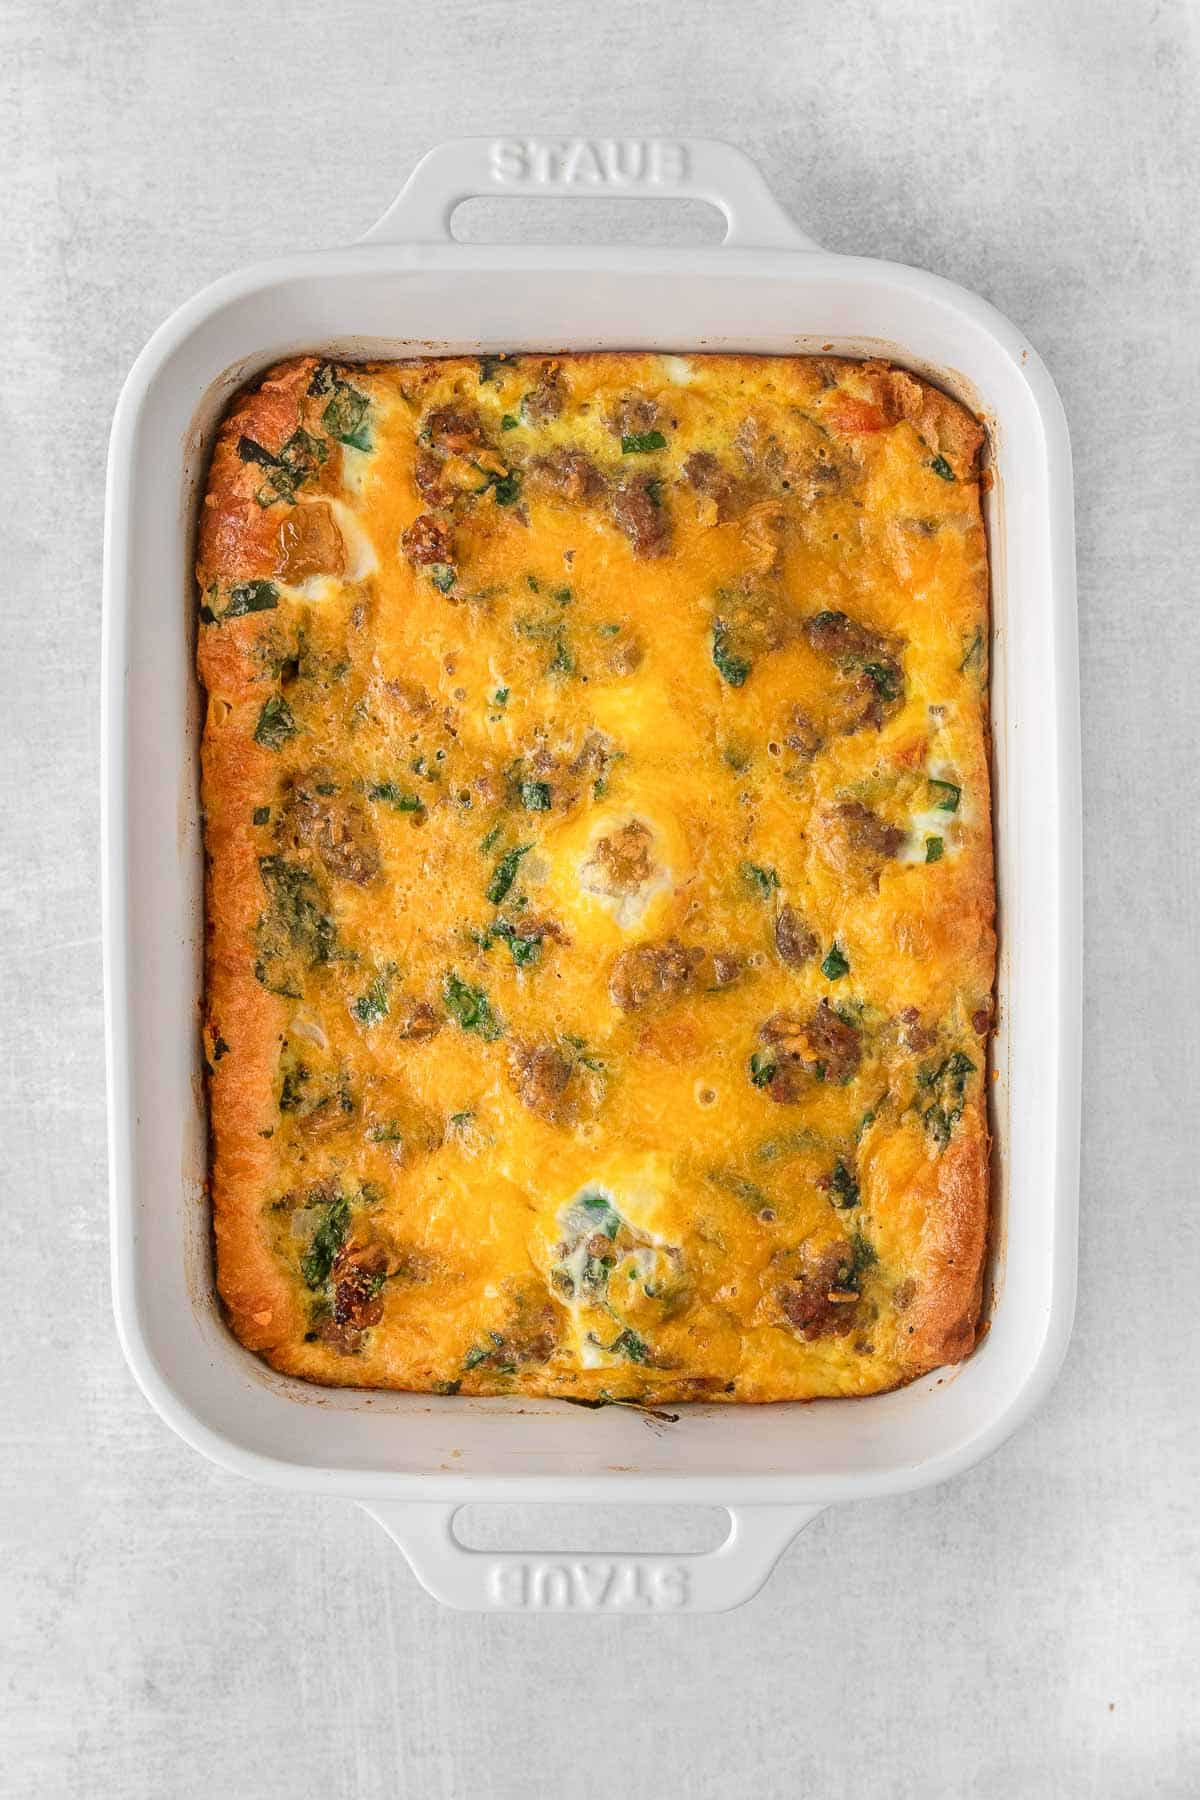 Breakfast casserole with sausage, egg and cheese in white rectangle baking dish.